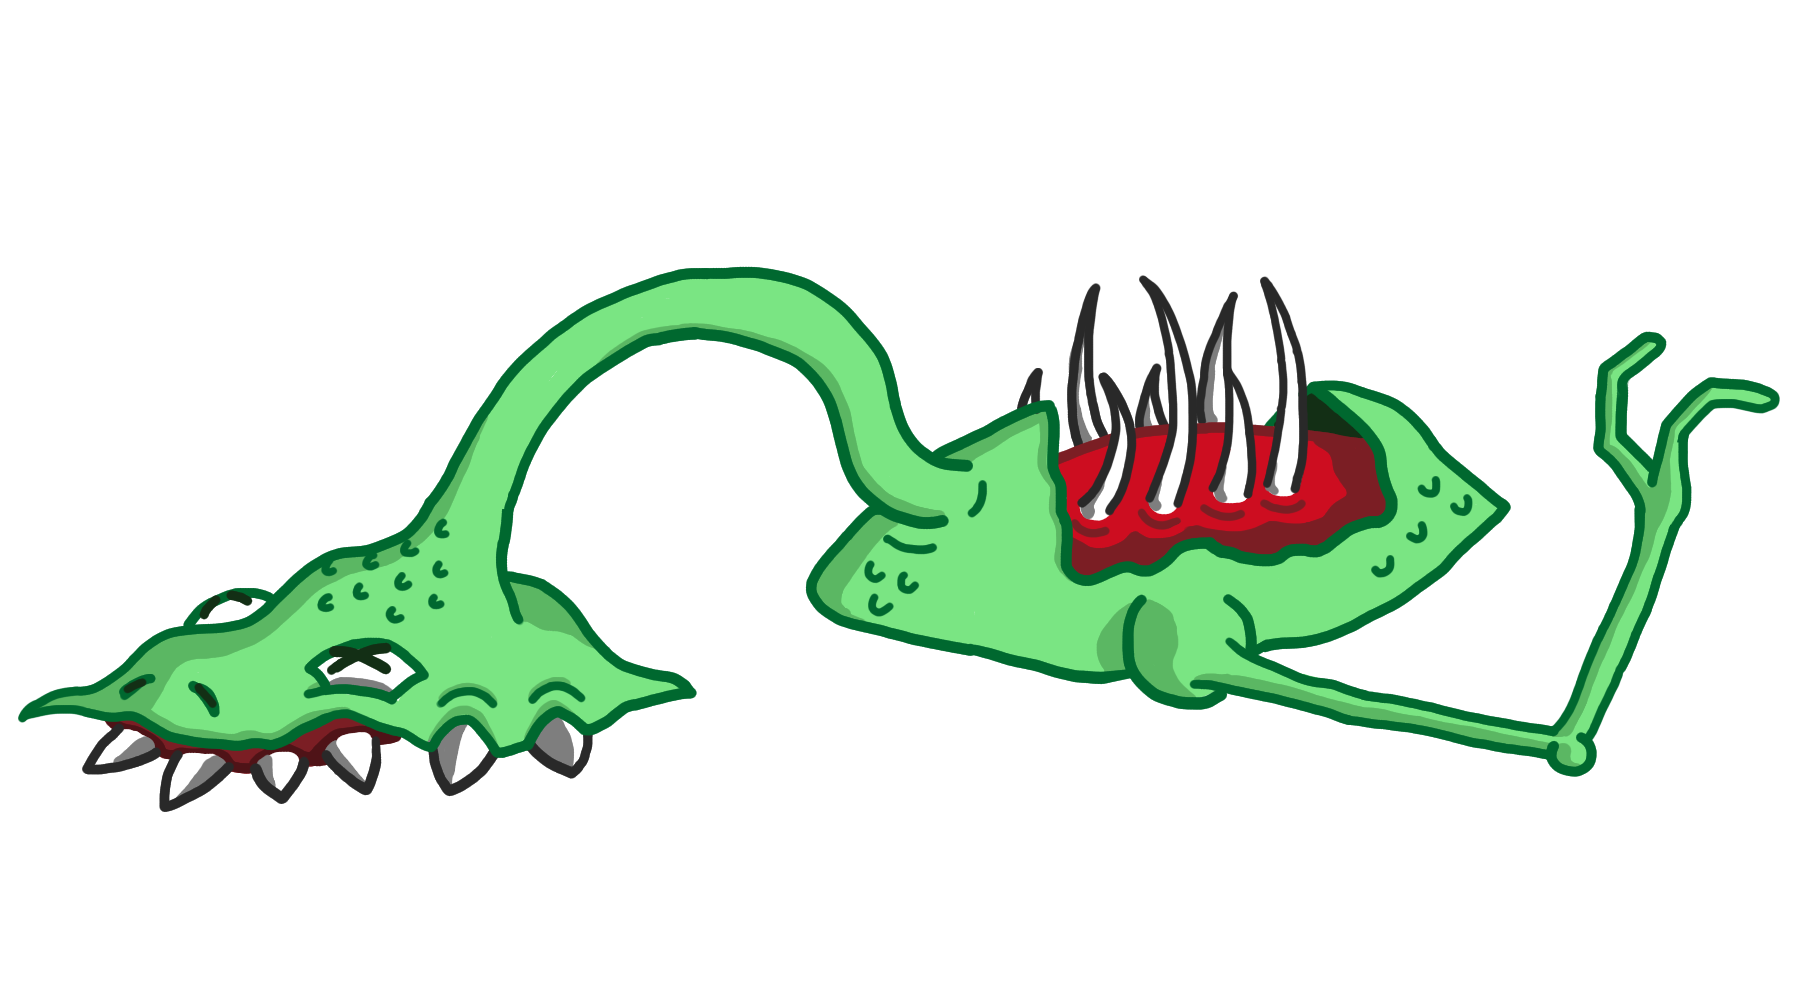 A cartoon drawing of a green lizard-like creature with a long neck and single arm. It appears to be dead, with its innards exposed and ribs poking out of its back.